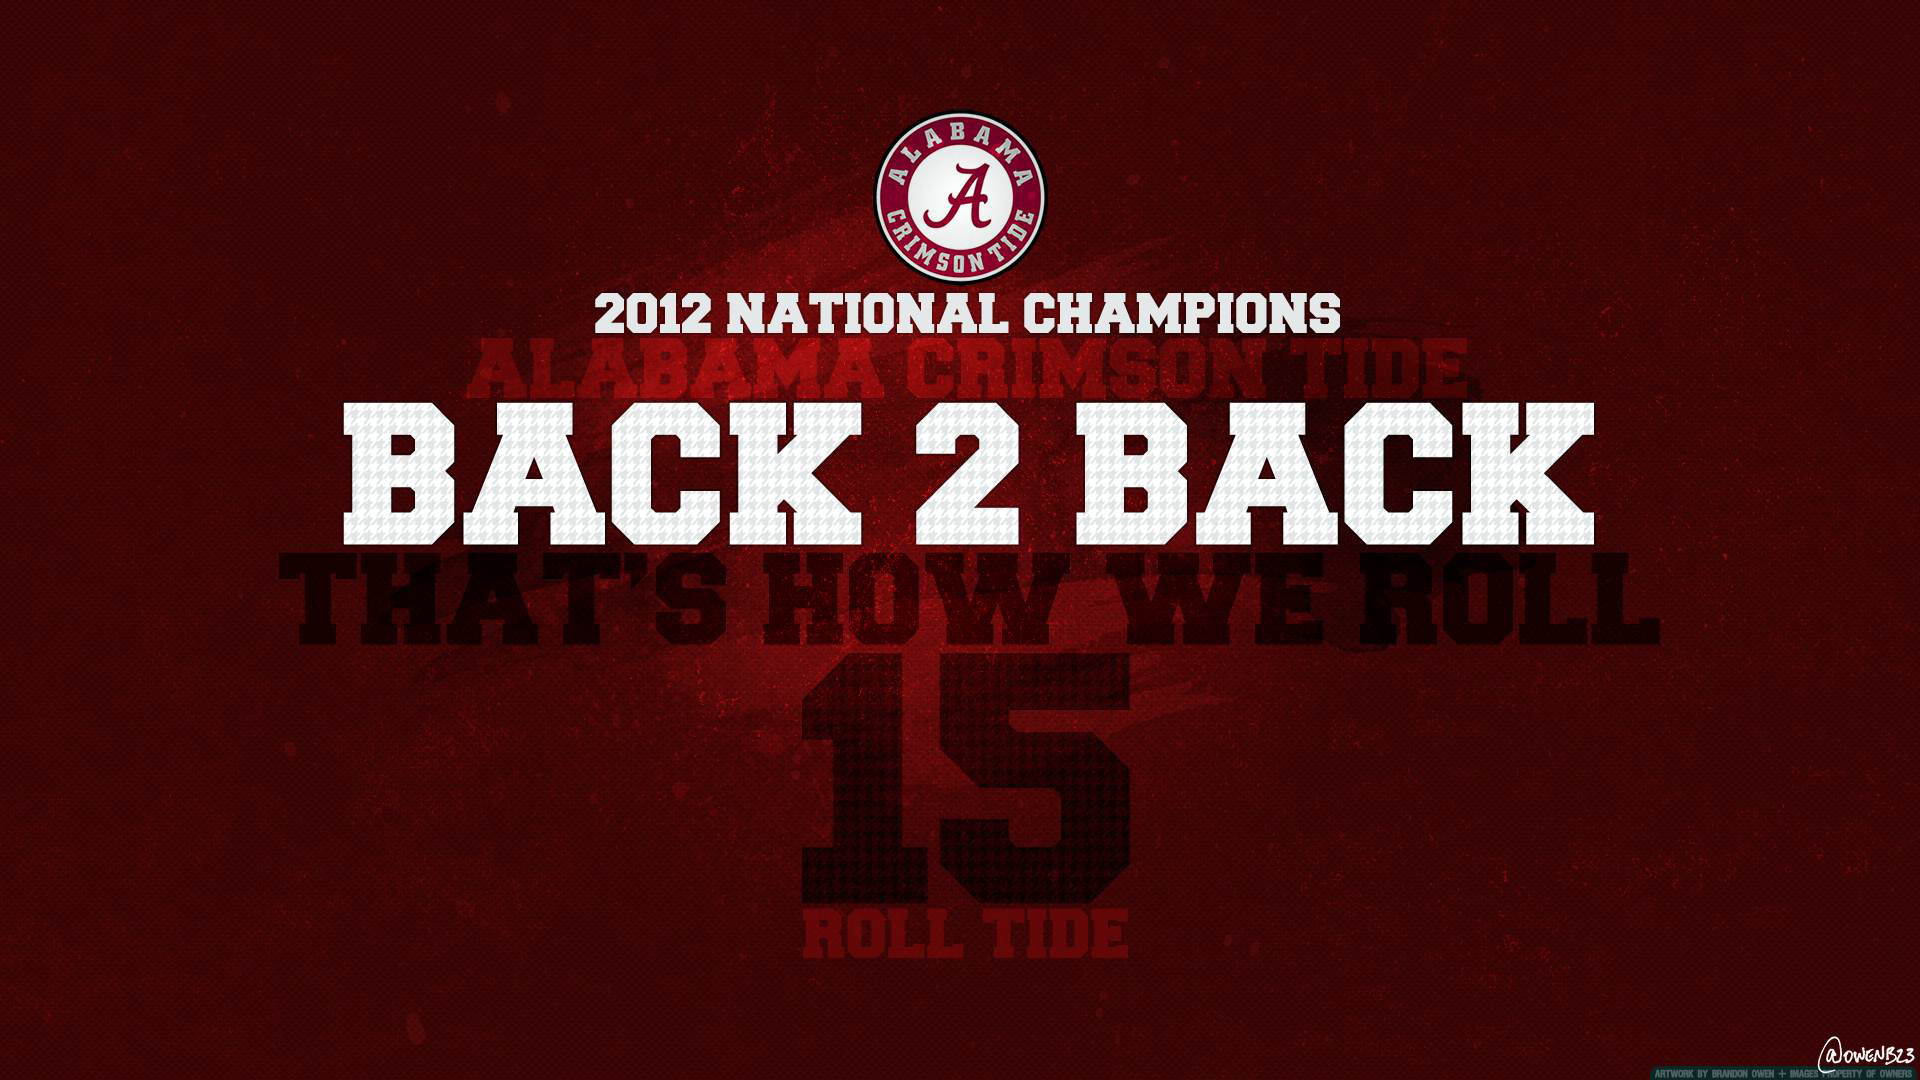 1920x1080 The official University of Alabama Crimson Tide new tab high resolution  images to theme your browser.